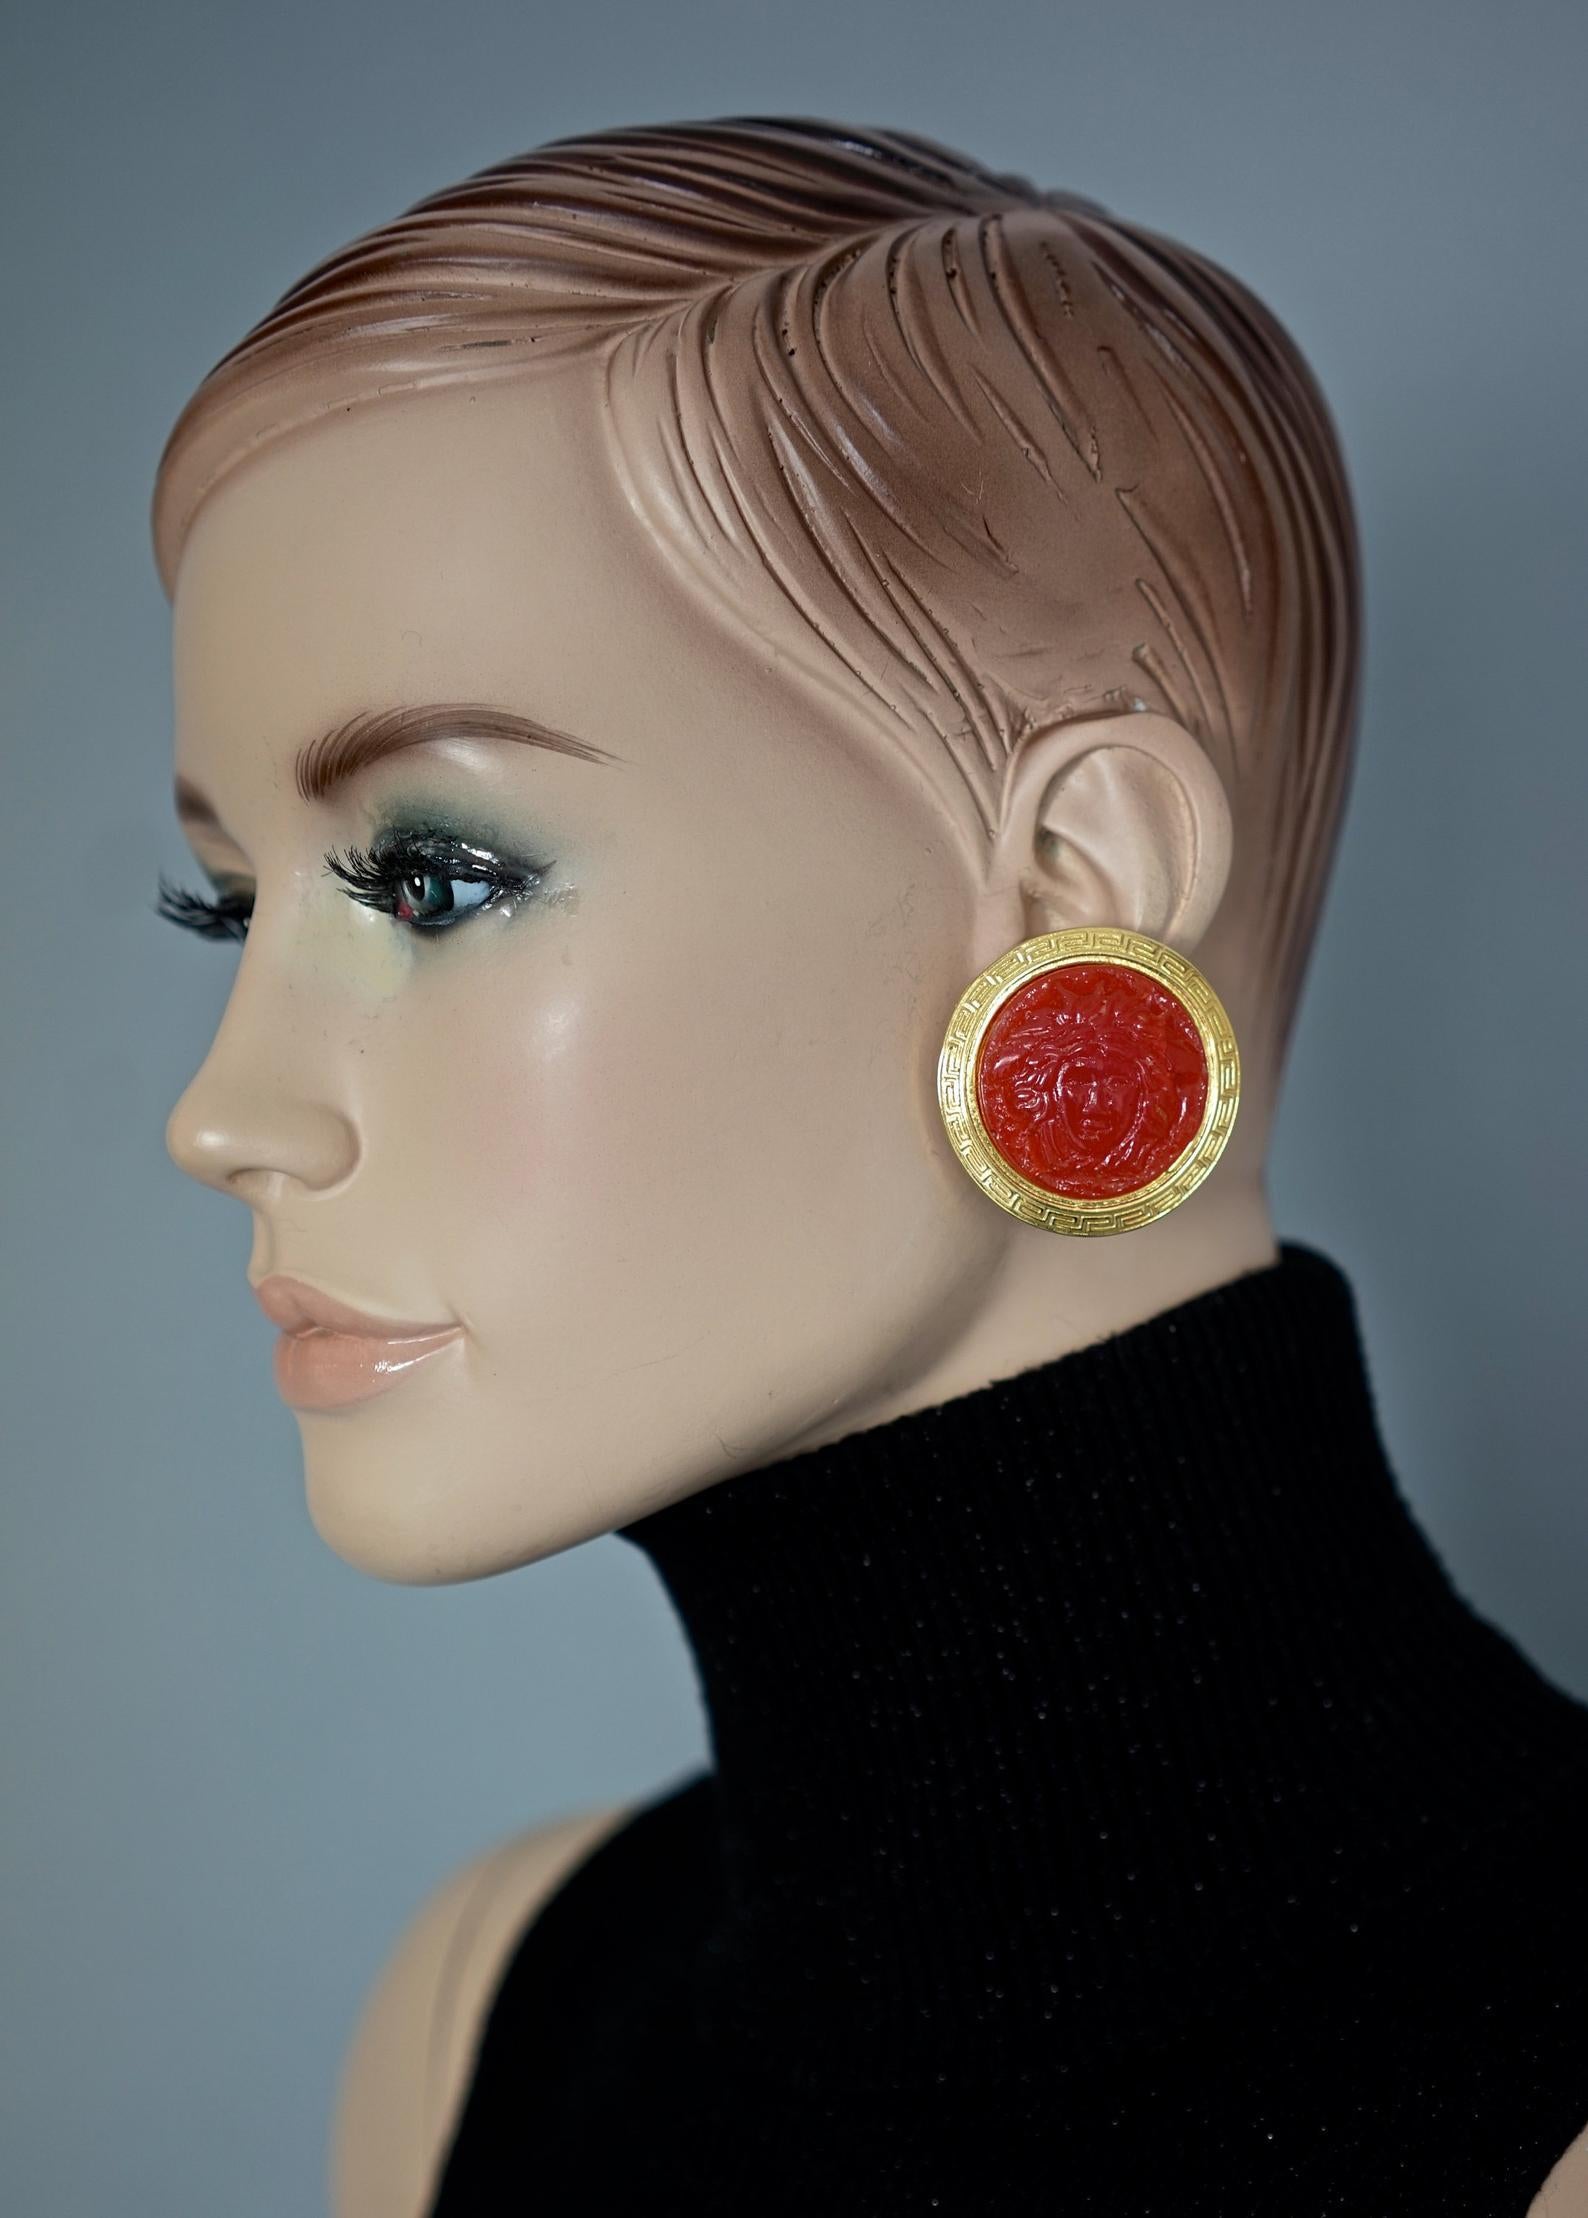 Vintage GIANNI VERSACE Red Medusa Greek Keys Medallion Disc Earrings

Measurements:
Height: 1.69 inches (4.3 cm)
Width: 1.69 inches (4.3 cm)
Weight per Earring: 23 grams

Features:
- 100% Authentic GIANNI VERSACE.
- Red Medusa head at the centre